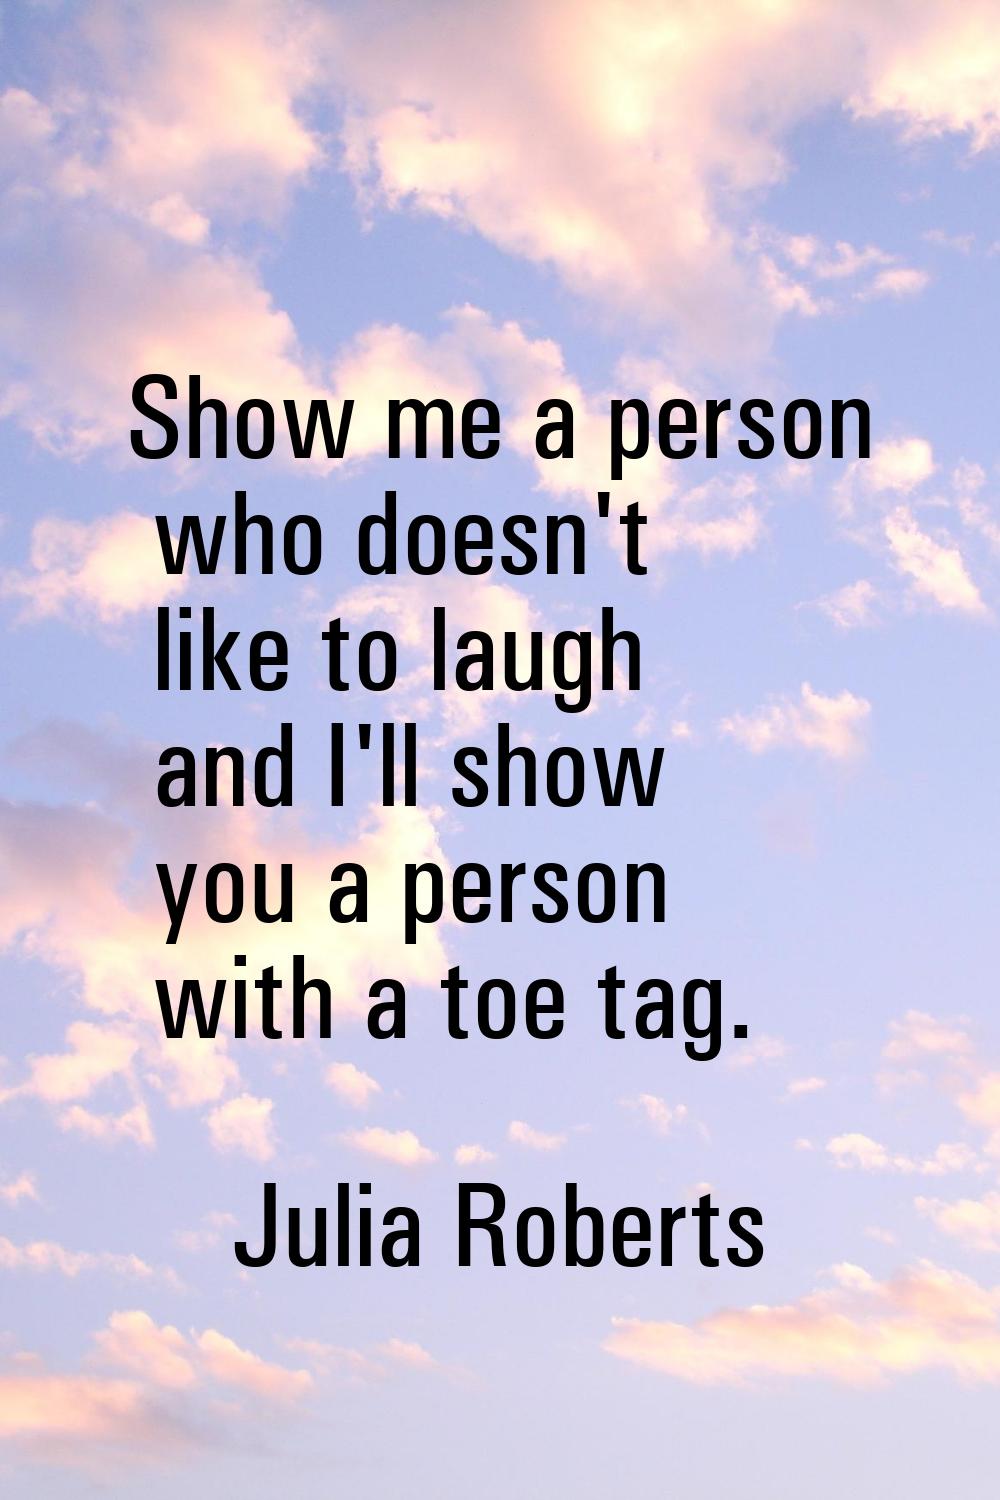 Show me a person who doesn't like to laugh and I'll show you a person with a toe tag.